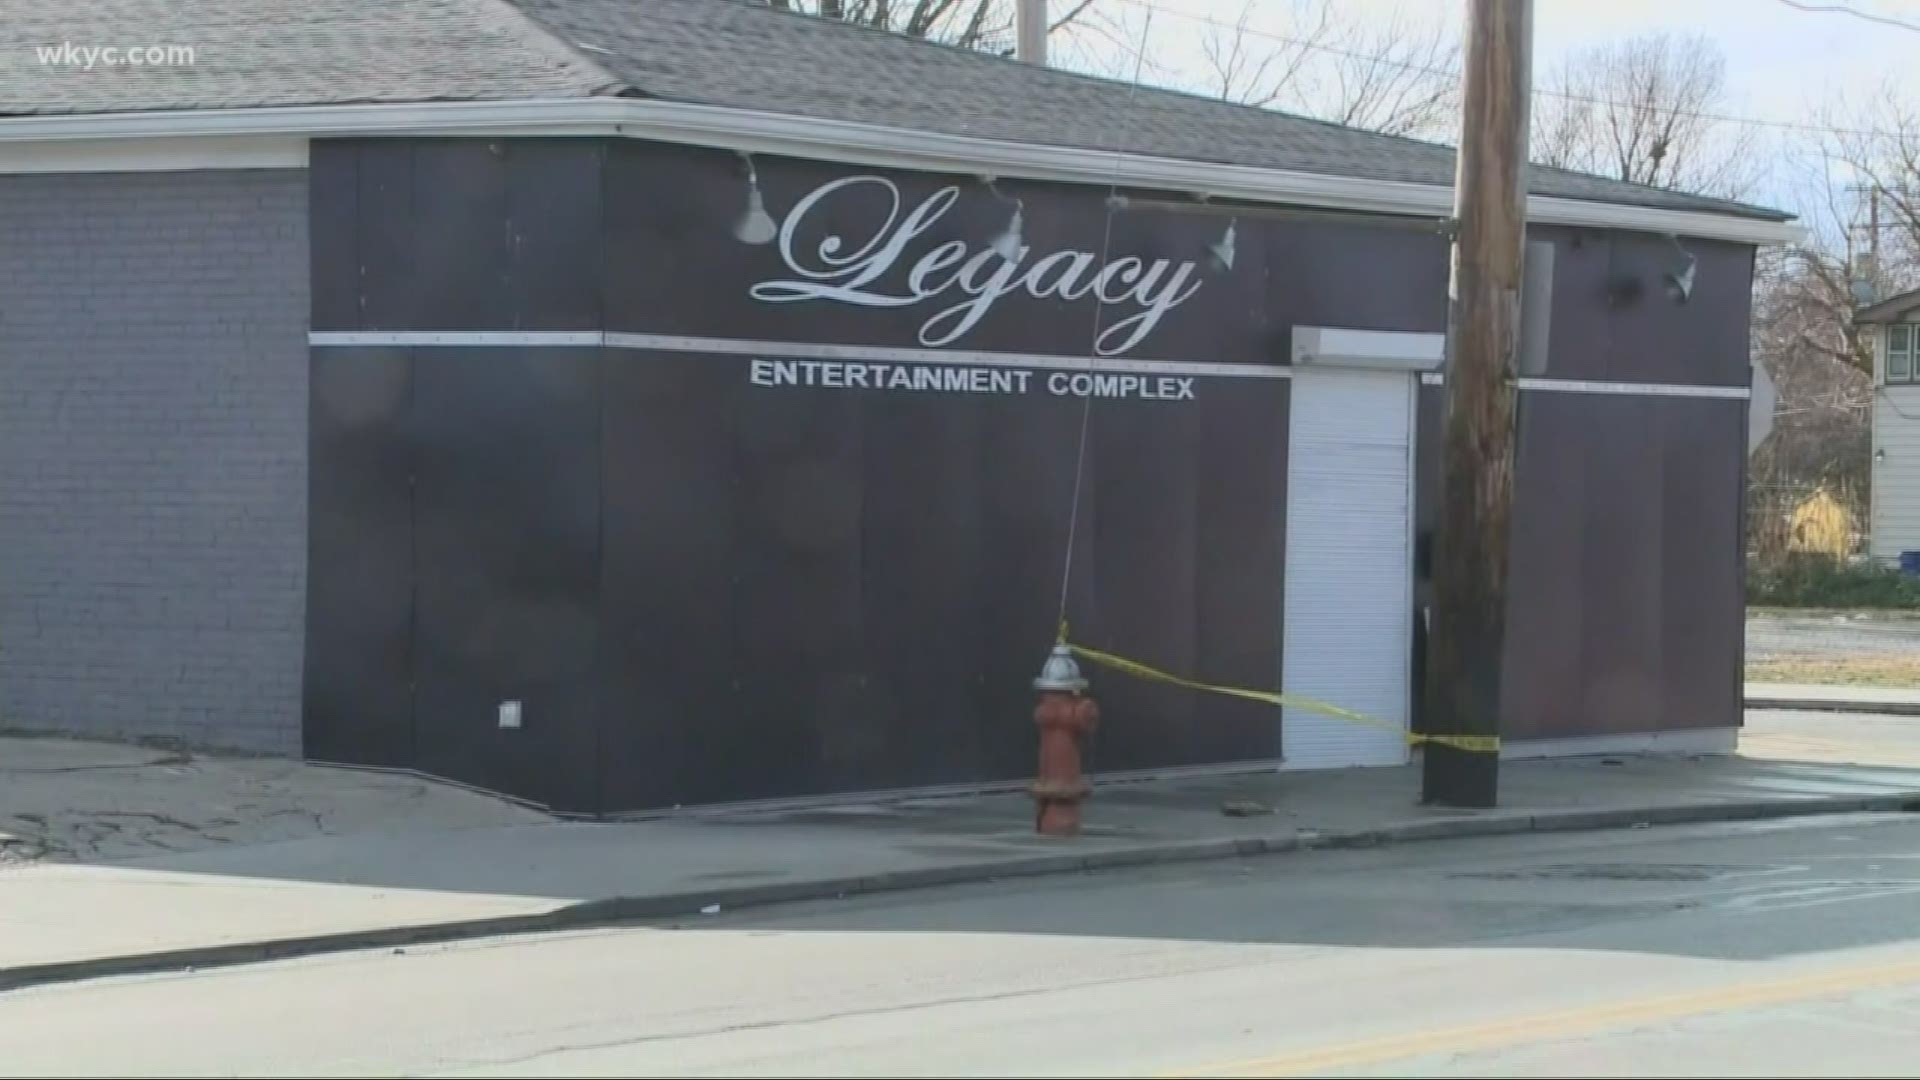 The incident occurred outside the Legacy Entertainment Complex on Union Avenue. Tiffany Tarpley reports.